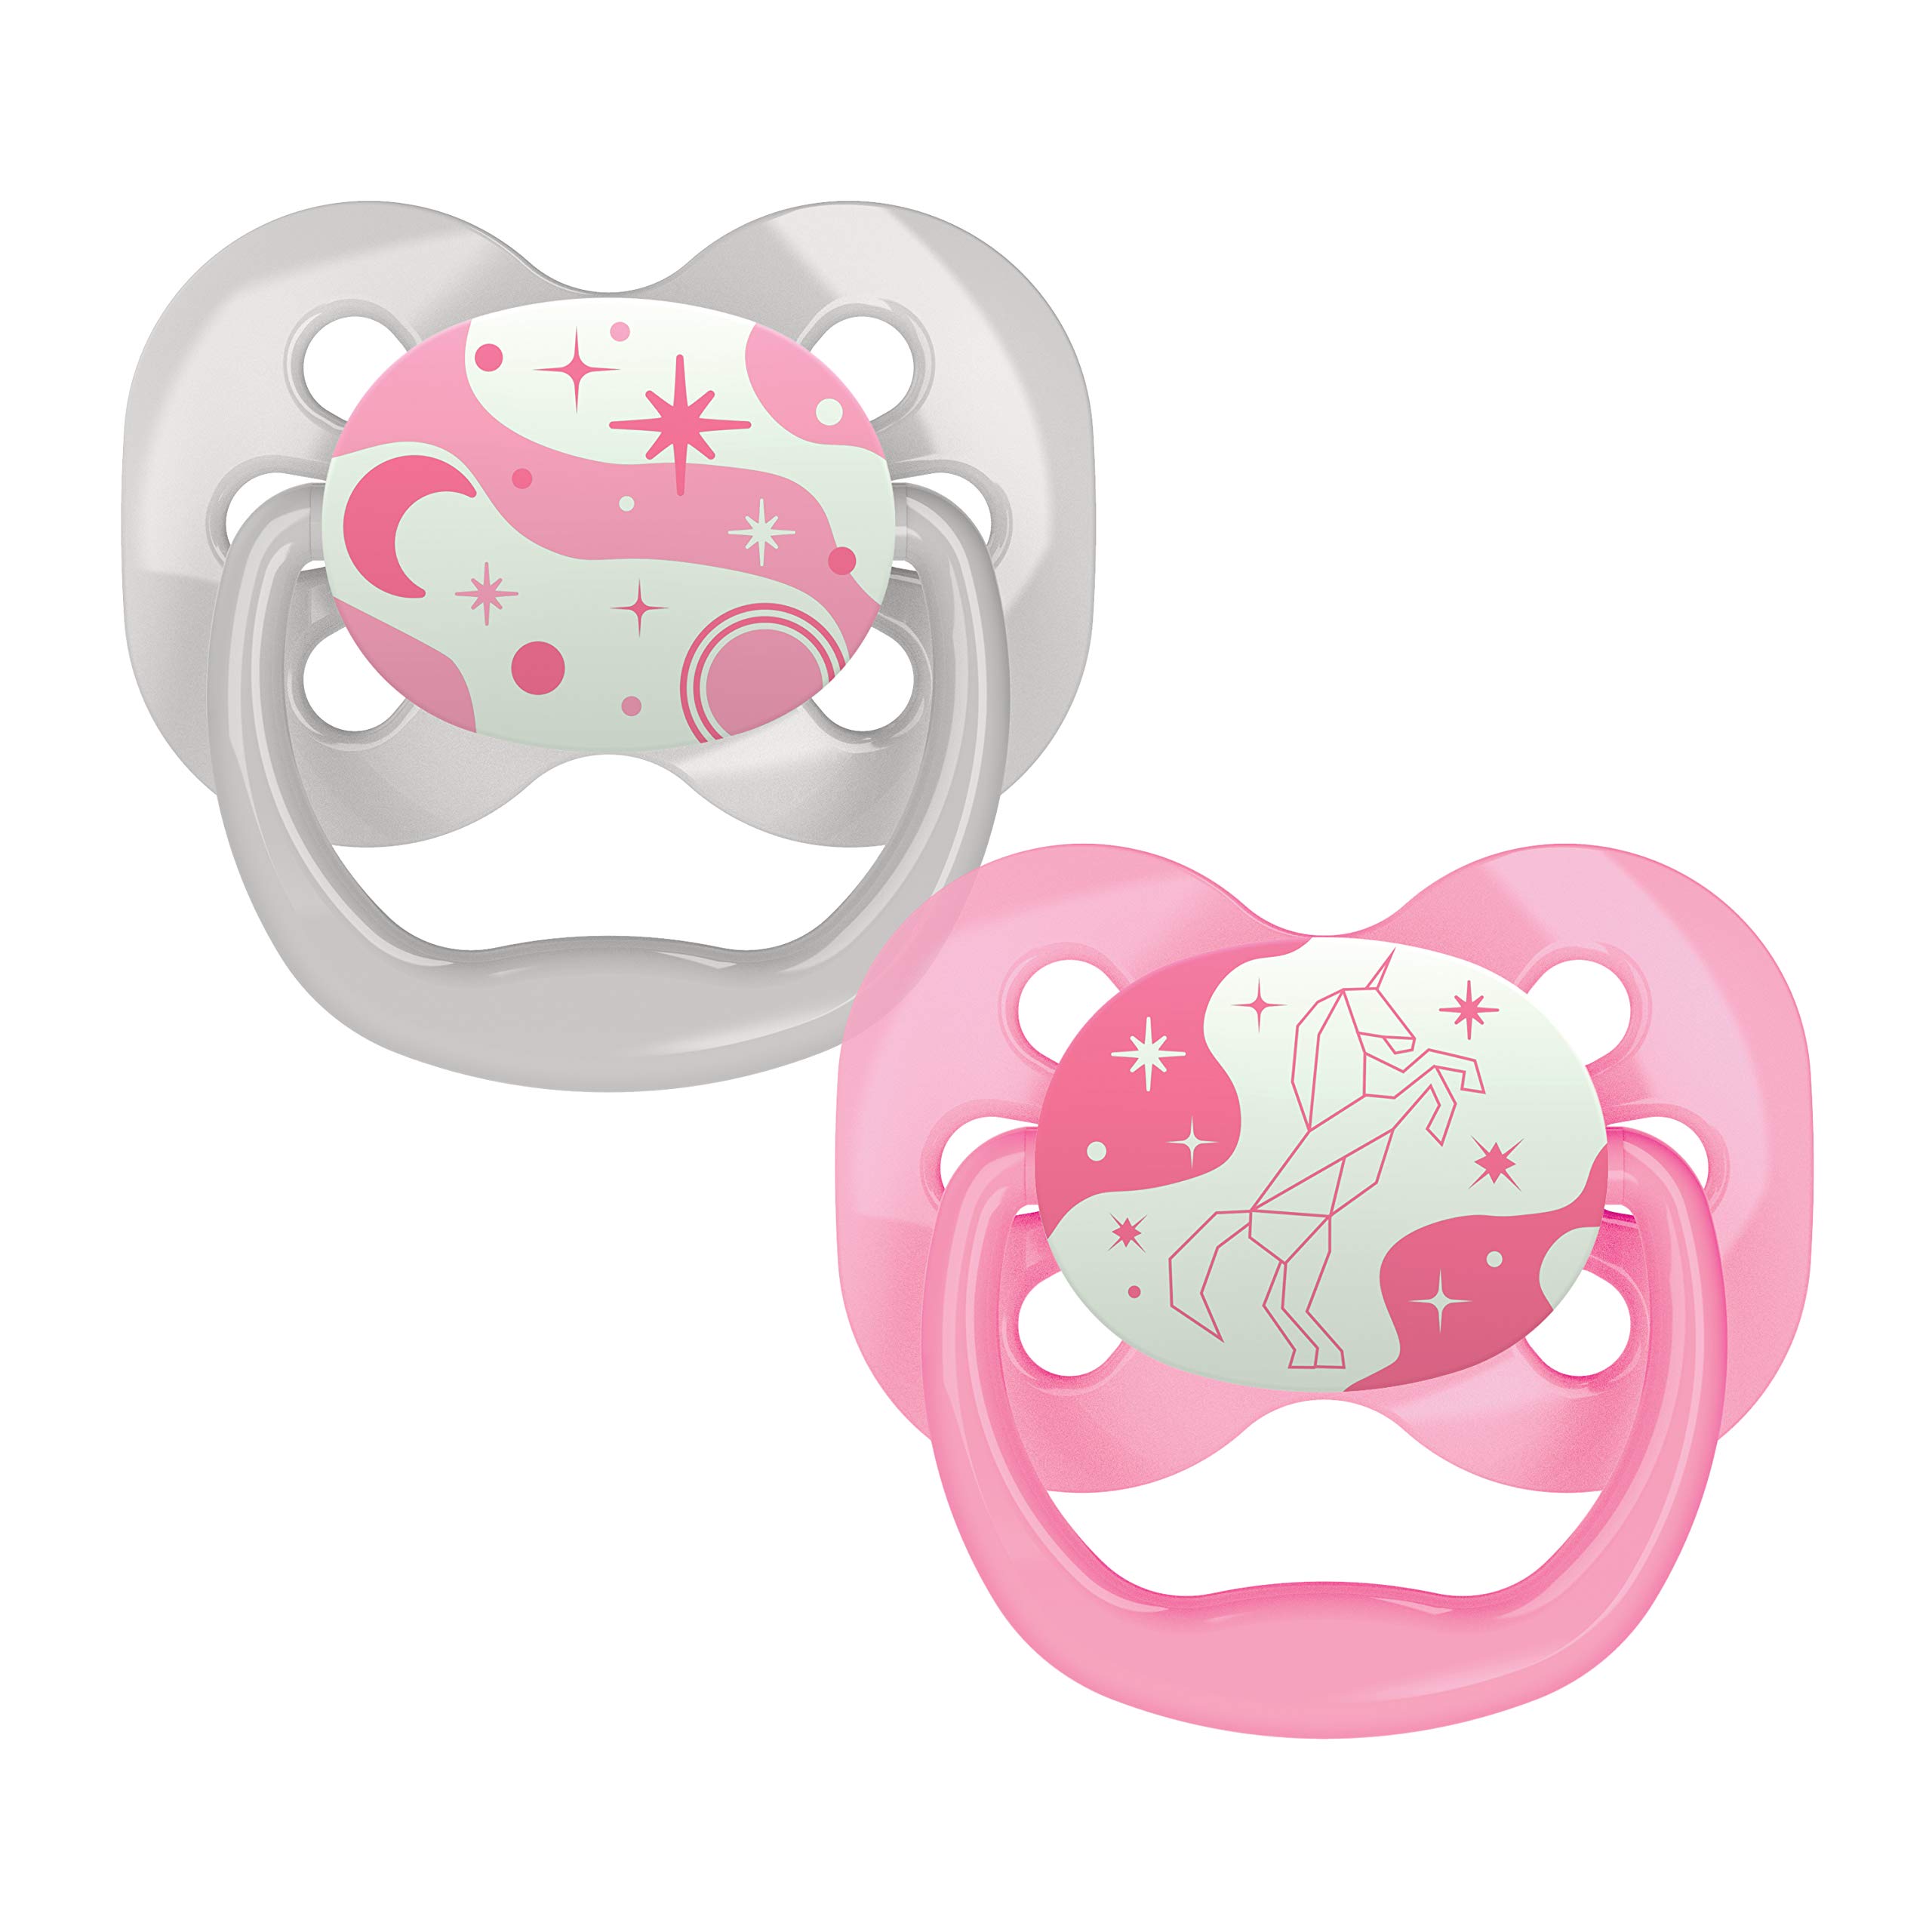 Dr.Browns PA22003 Glow in the dark silicone pacifier 6-12m.